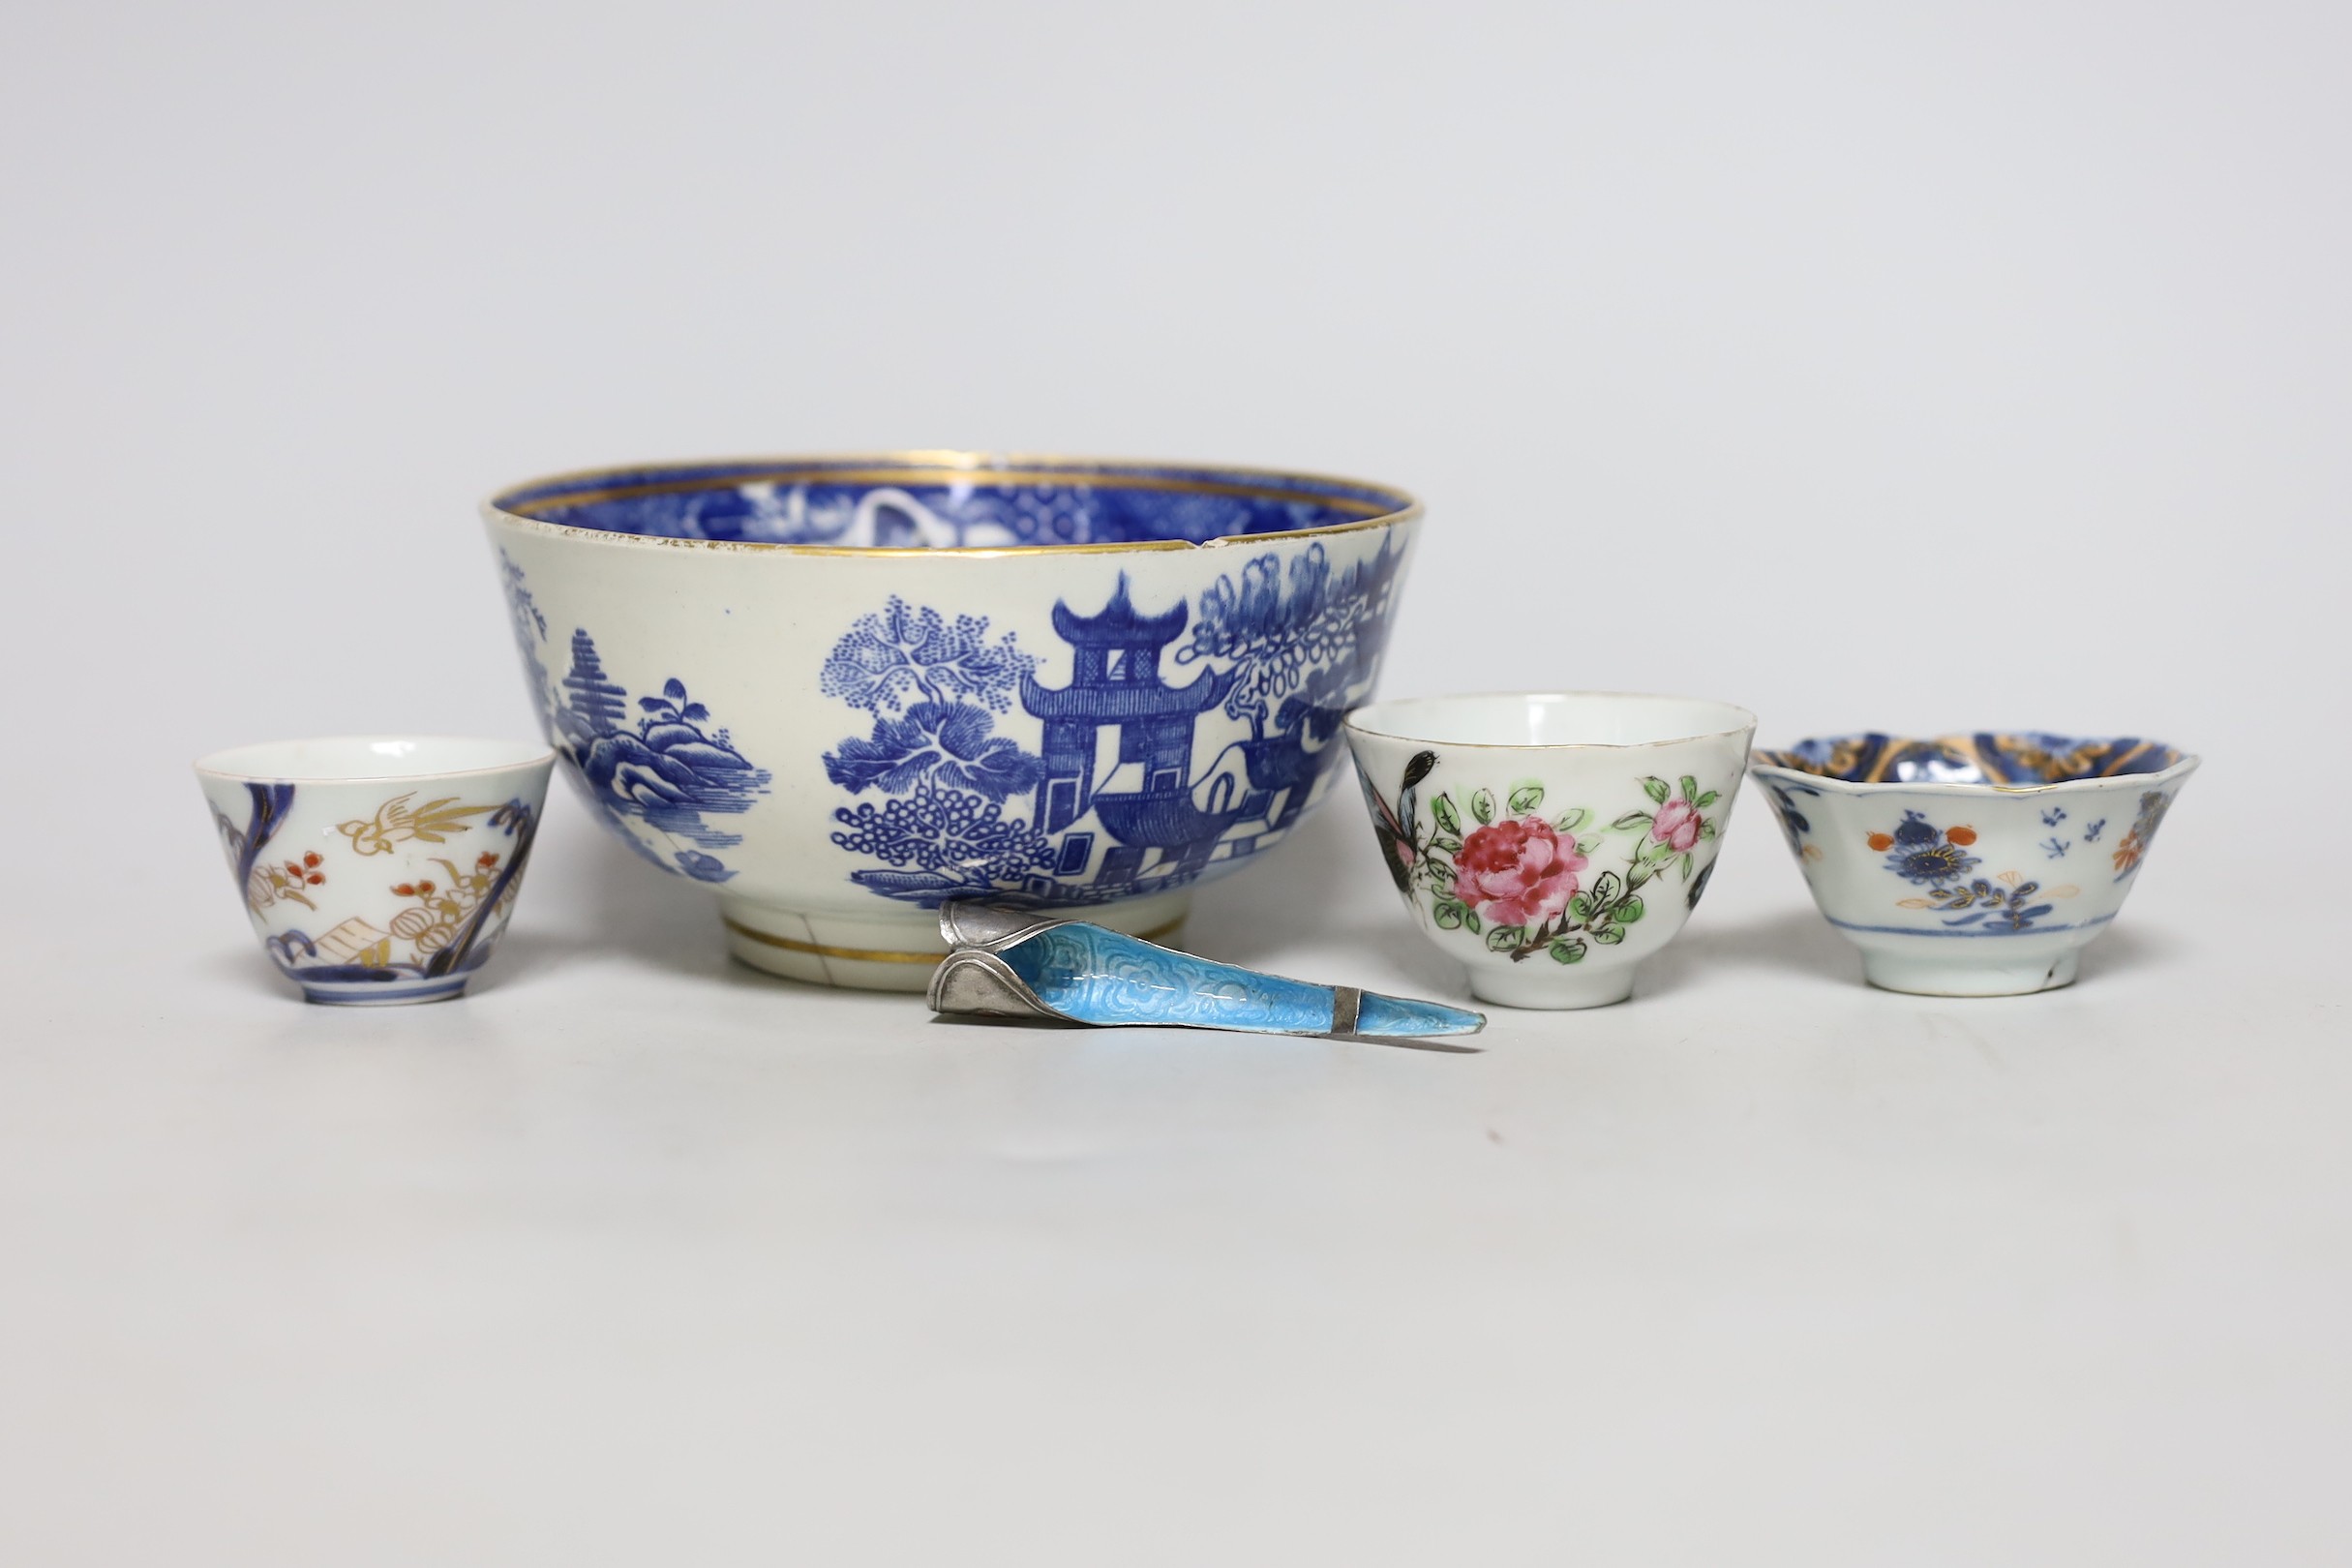 An English porcelain blue and white slop bowl, 15cm diameter, together with three miniature Chinese tea bowls and one nail guard